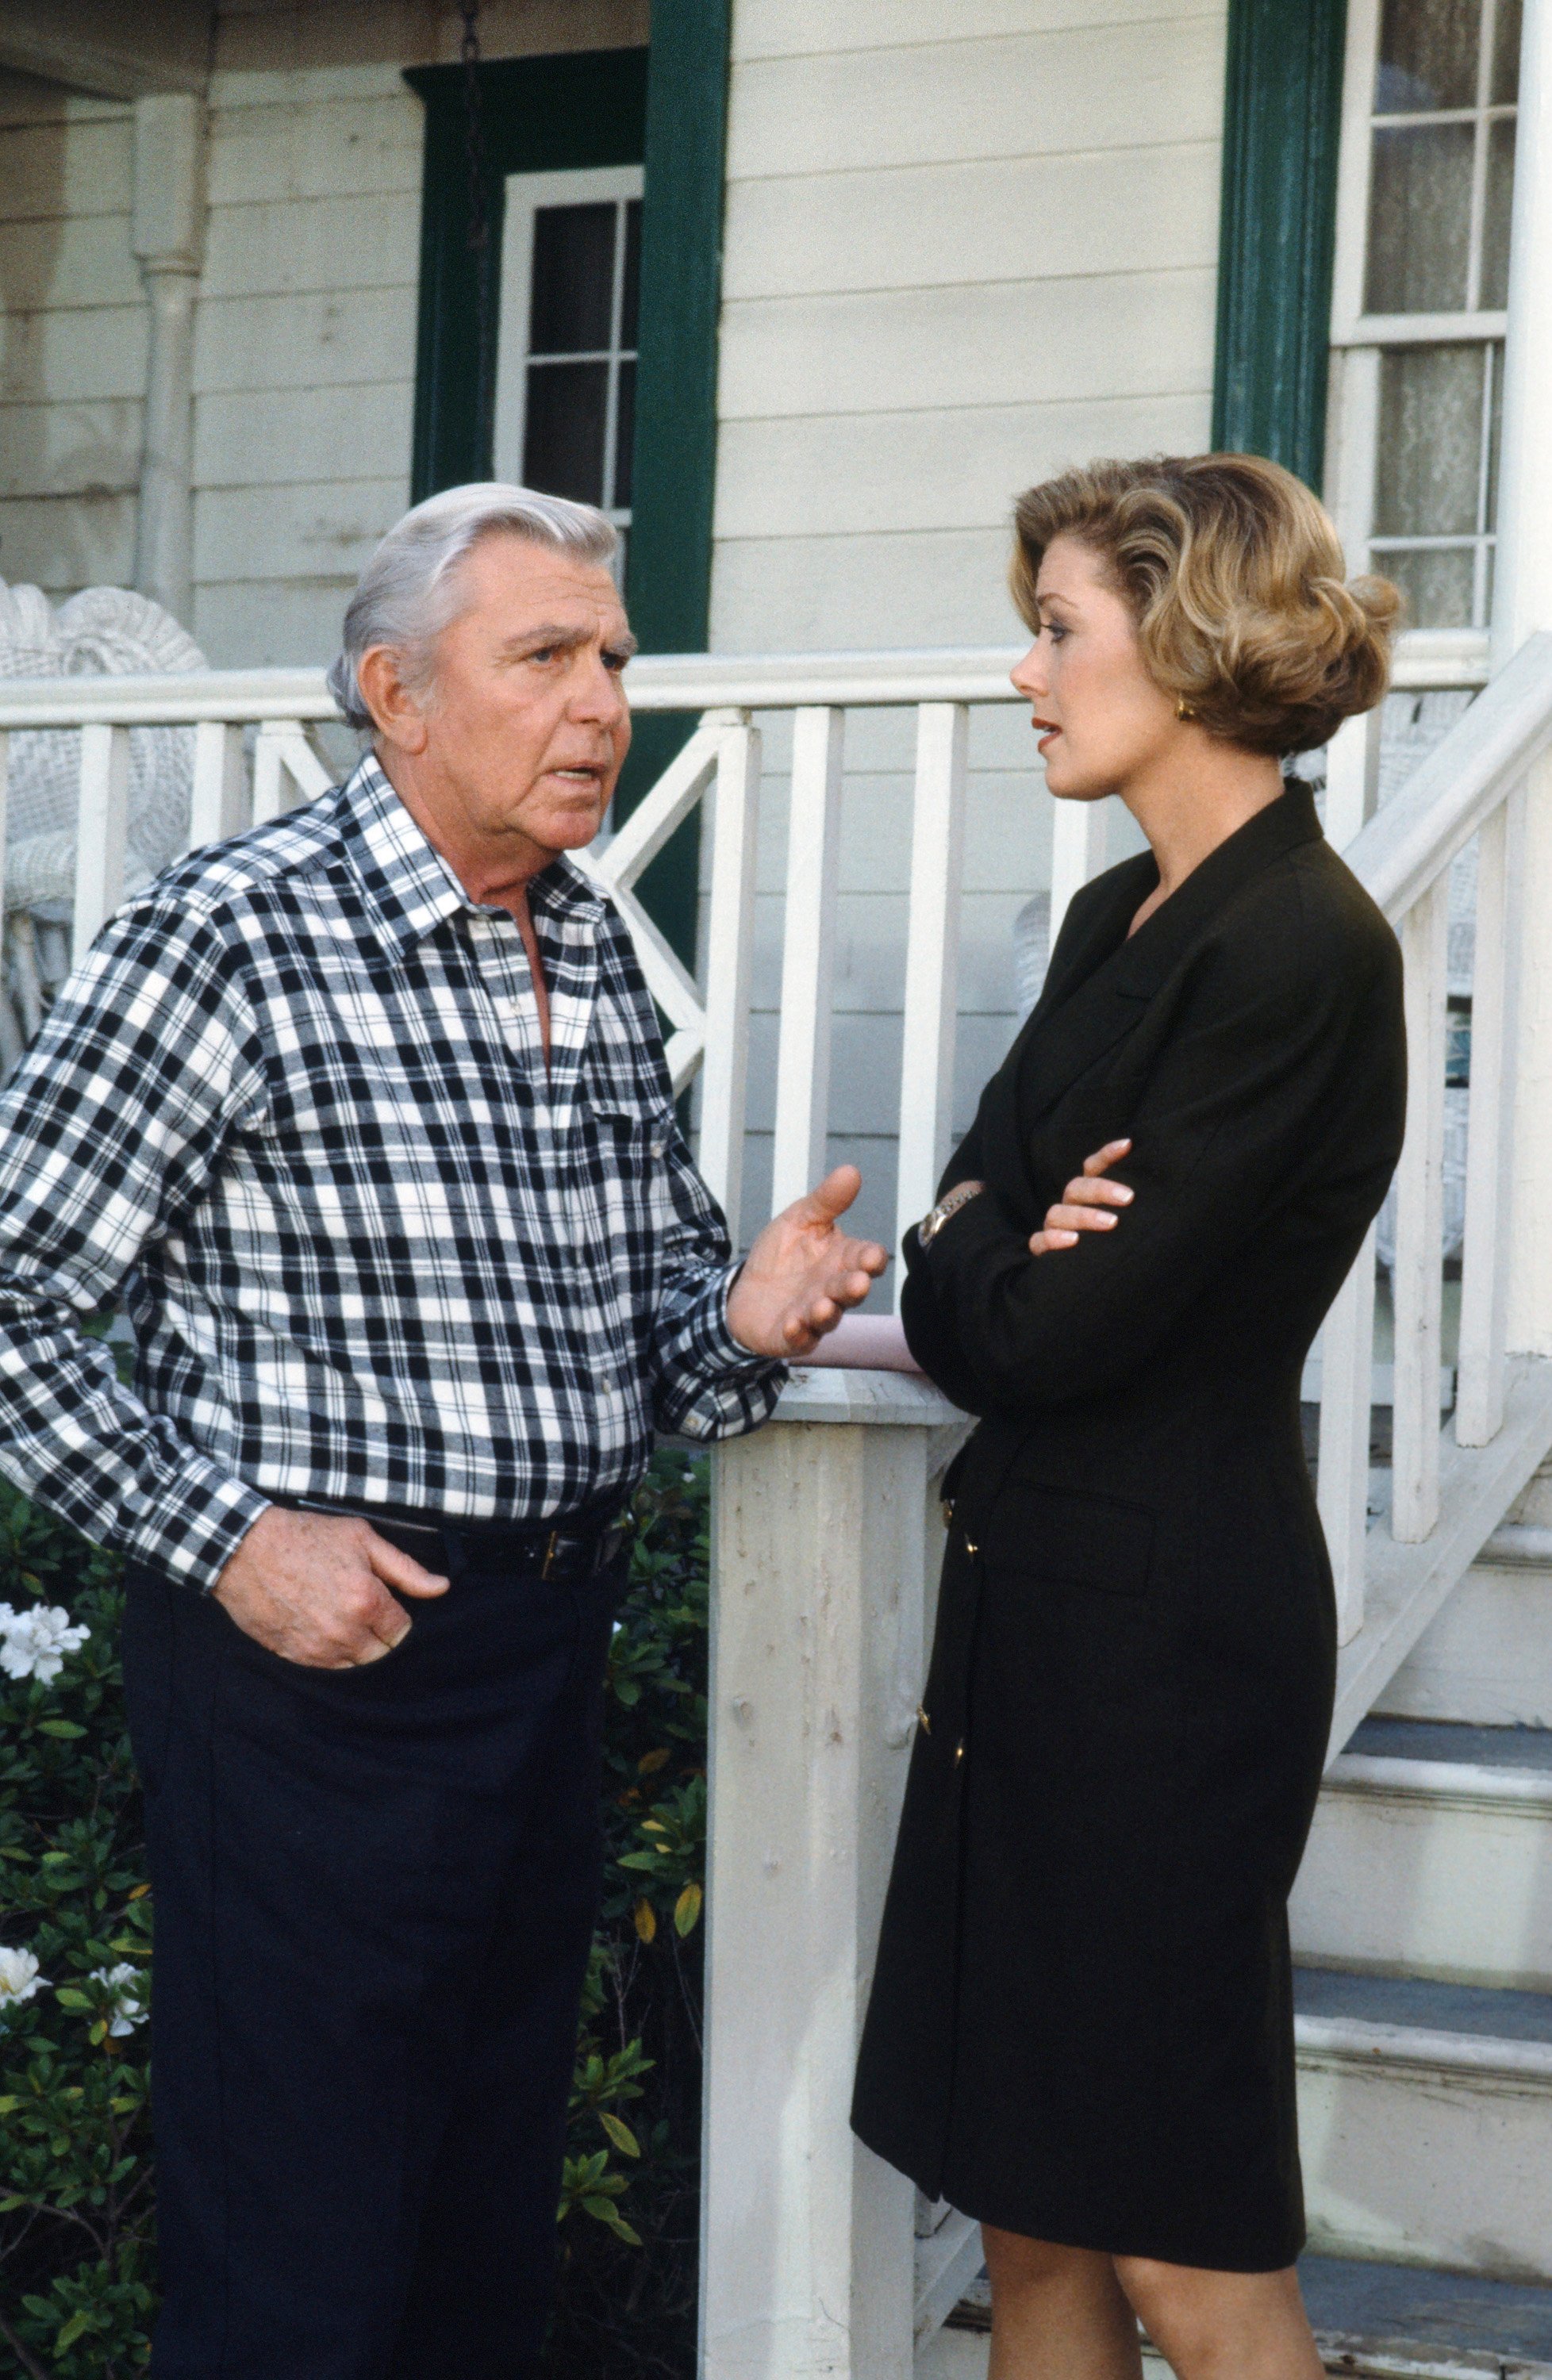 Andy Griffith, left, and Nancy Stafford in a scene from 'Matlock'